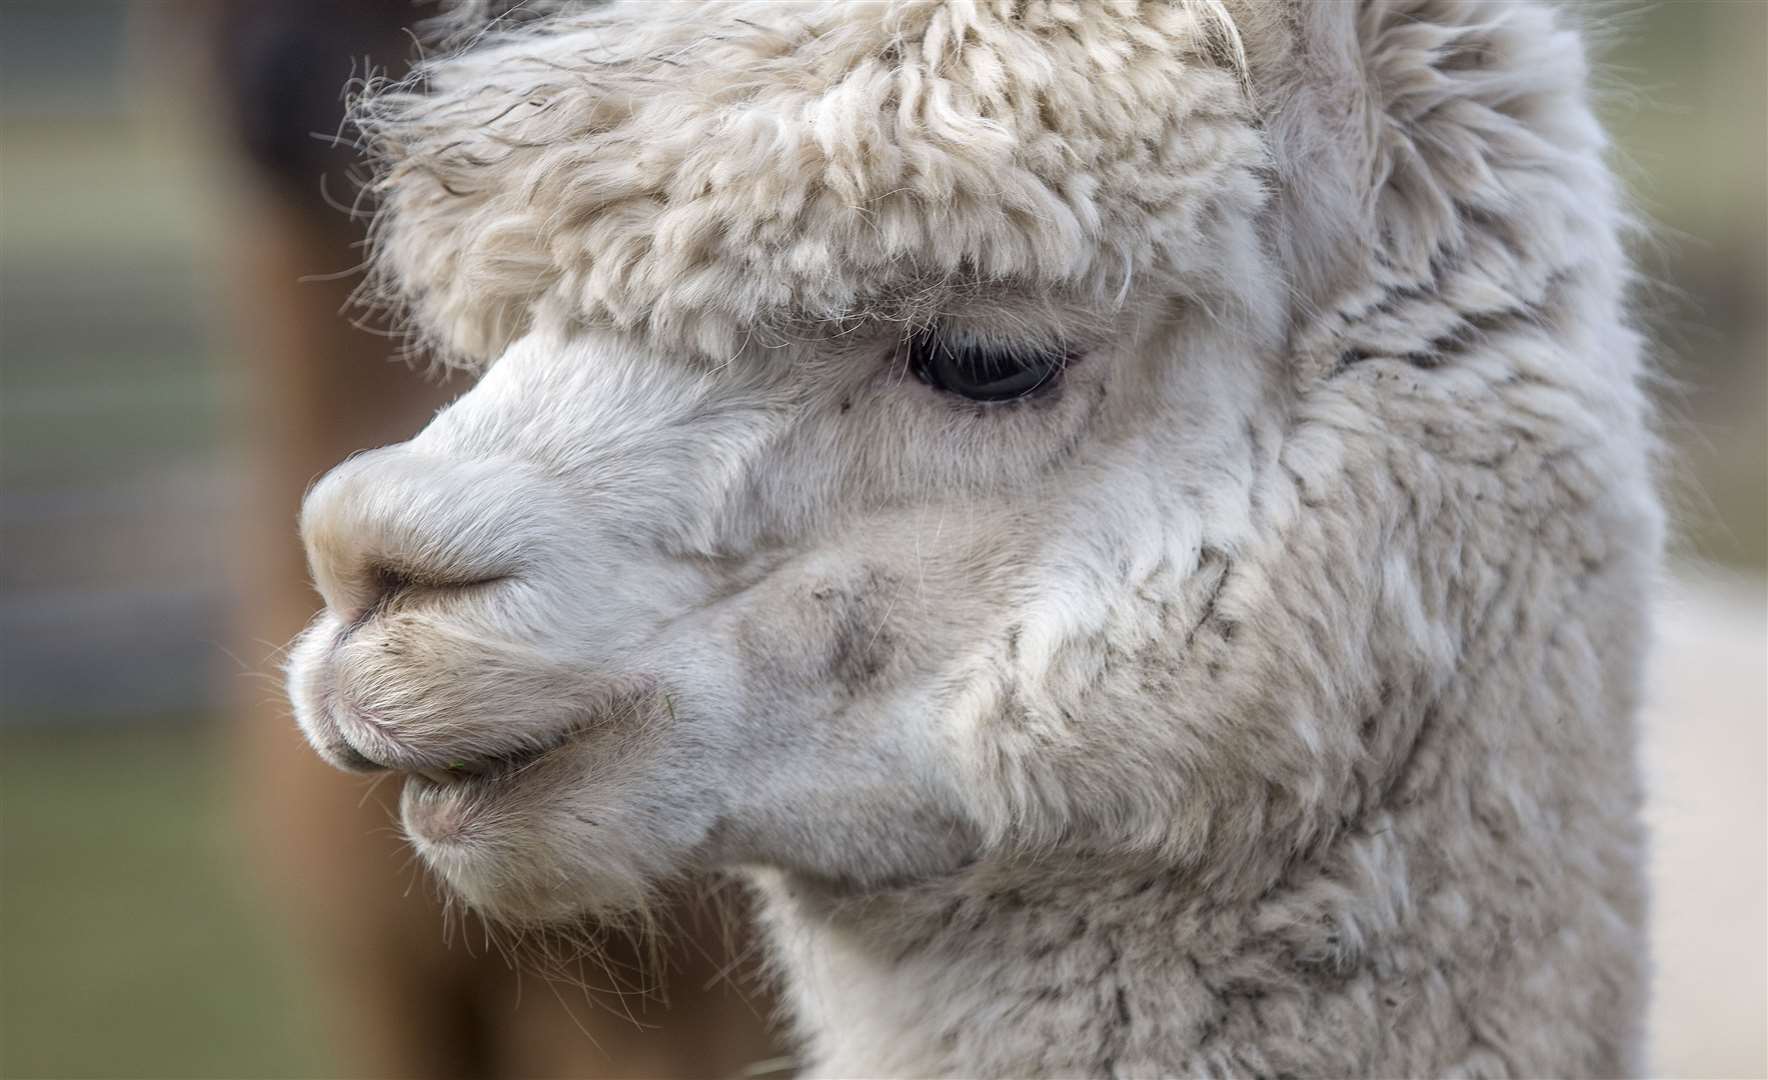 The glamping site will have a petting zoo including Alpacas nearby. Picture: Stock